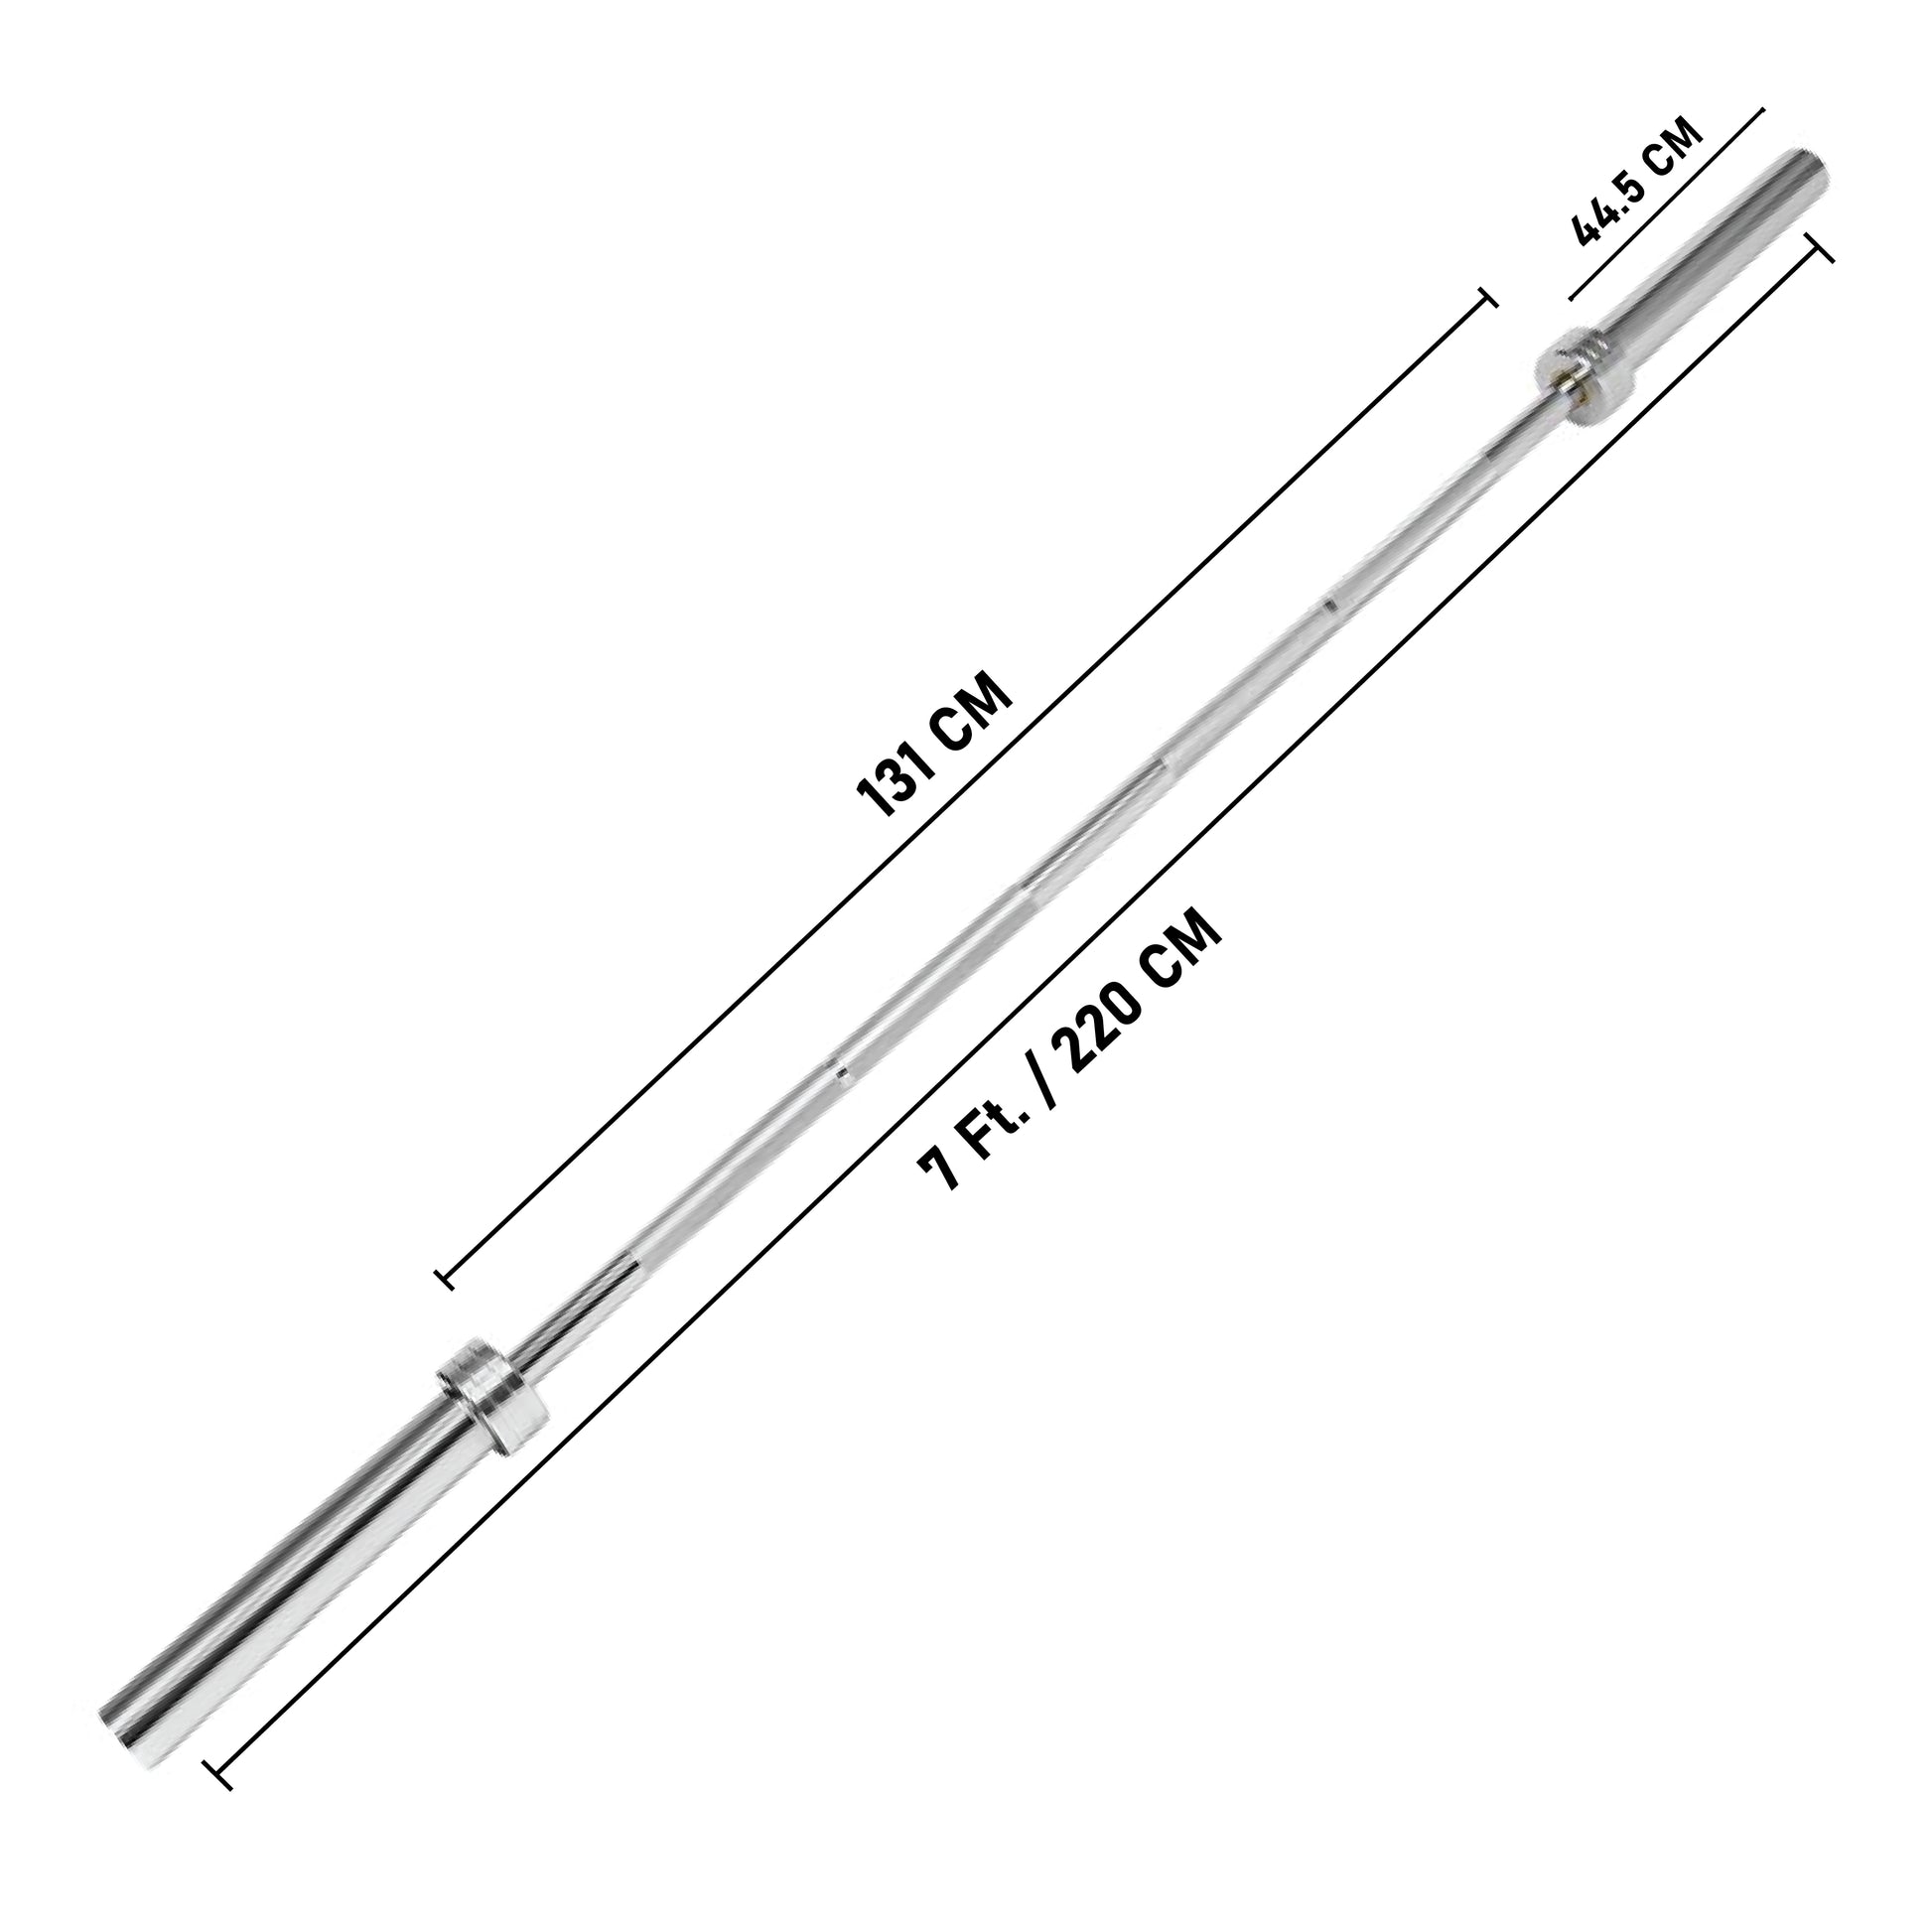  7 ft Olympic Barbell with Collars - 20 Kg